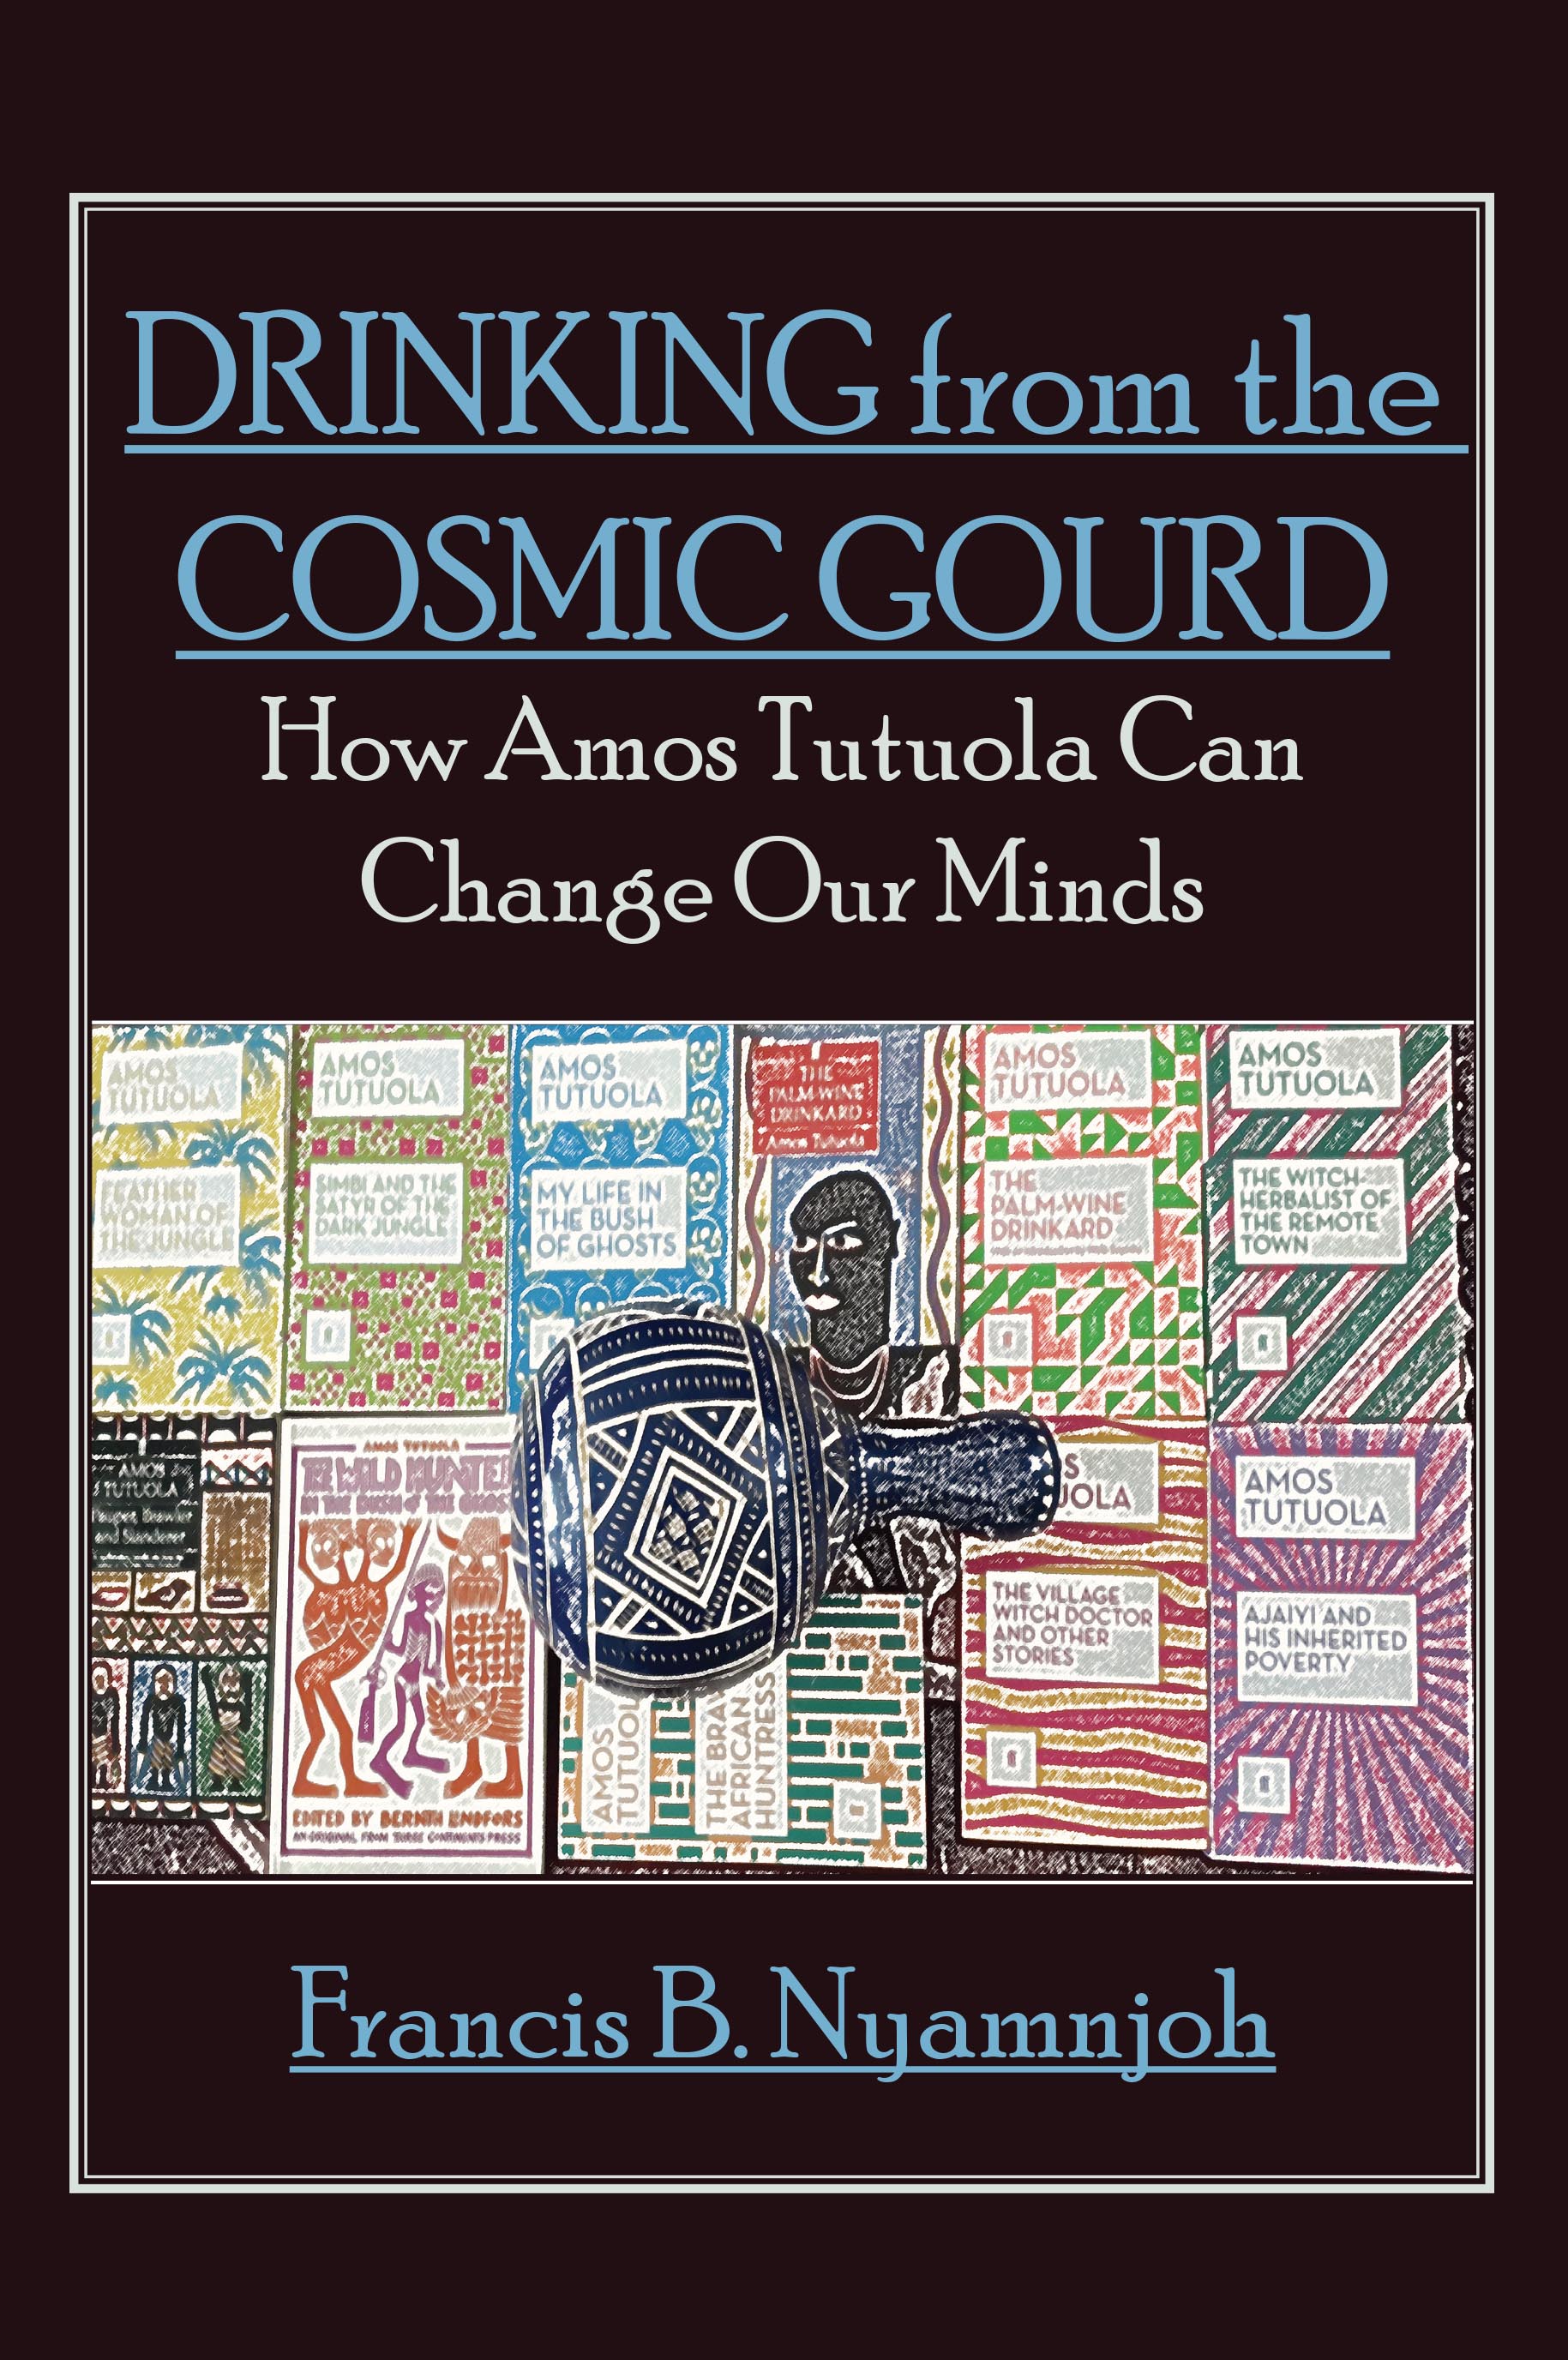 Drinking-from-the-Cosmic-Gourd--How-Amos-Tutuola-Can-Change-Our-Minds